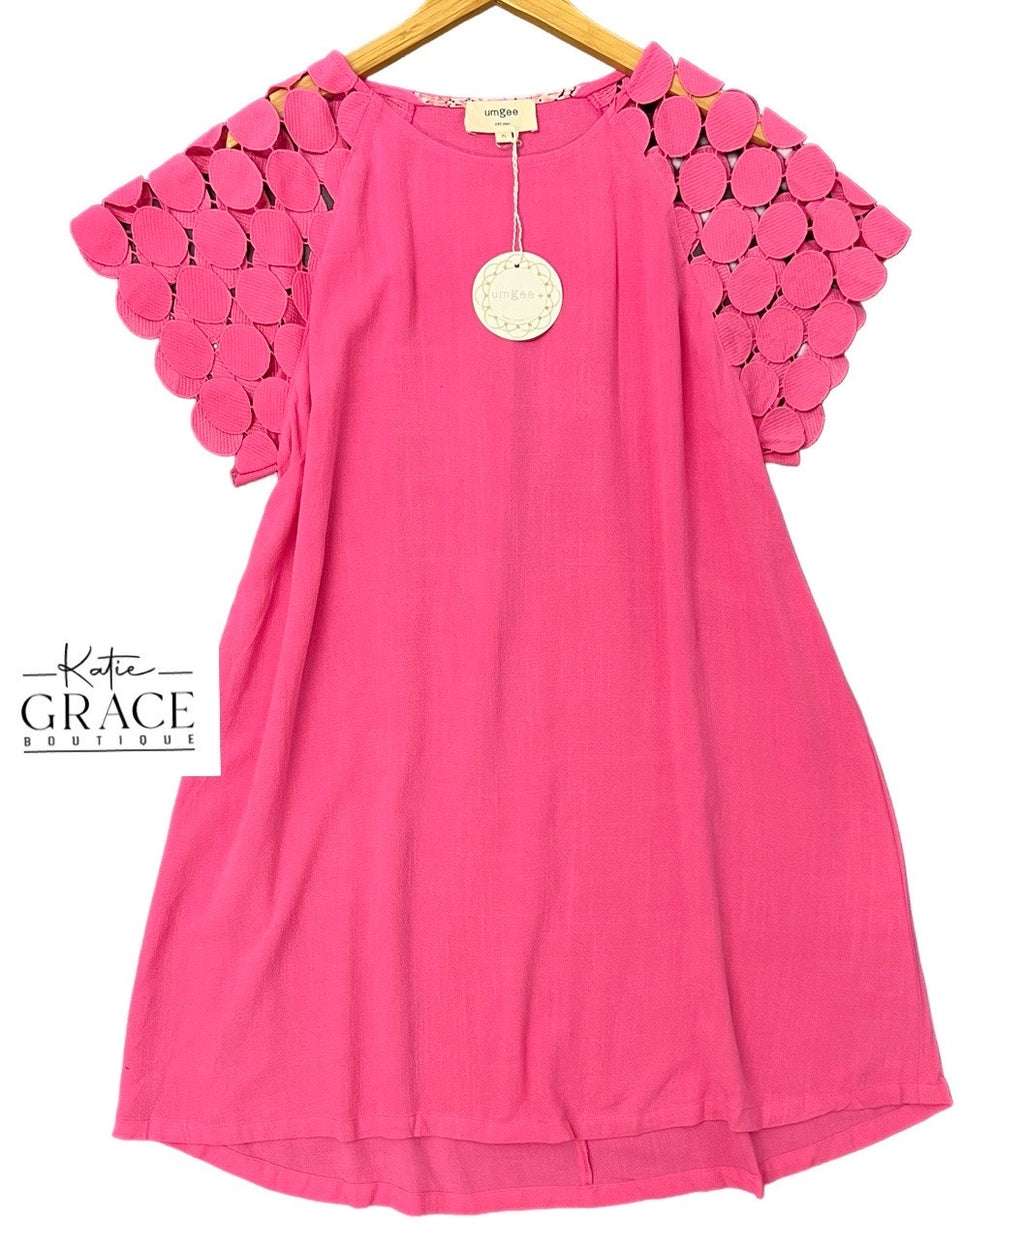 "Yancy" Circle Embroidered Sleeve Dress - The Katie Grace Boutique